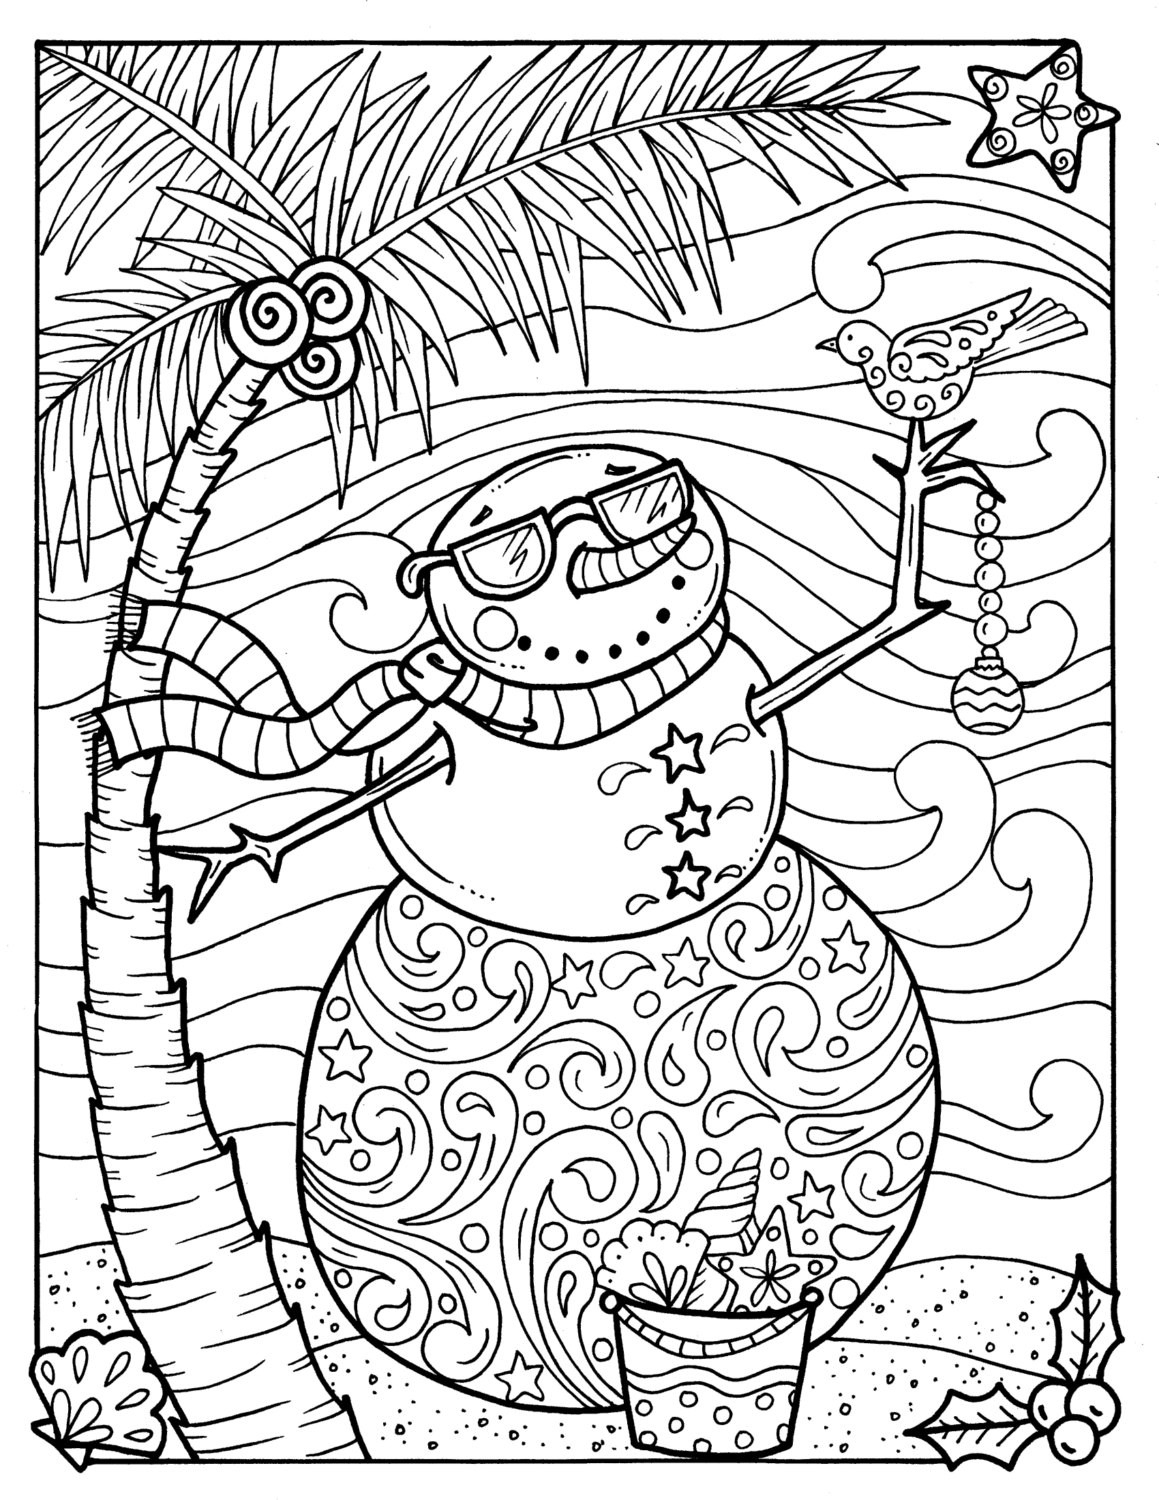 Snowman Coloring Pages For Adults
 Tropical Snowman Coloring page Adult Coloring beach holidays